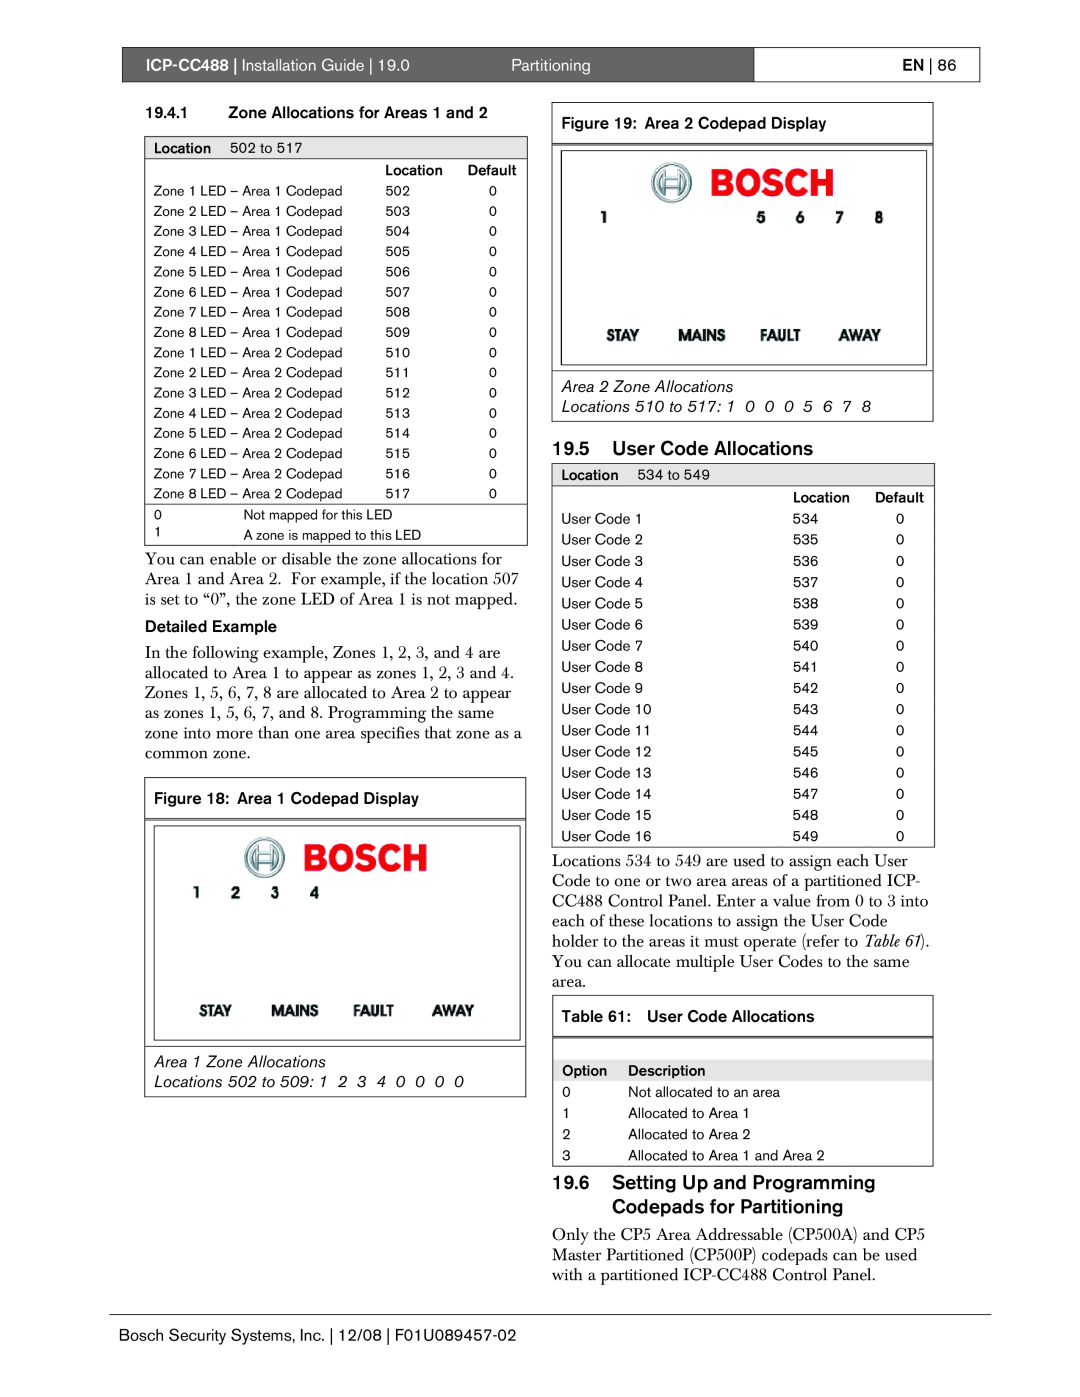 Bosch Appliances manual 19.5User Code Allocations, ICP-CC488| Installation Guide, Partitioning, En, Detailed Example 